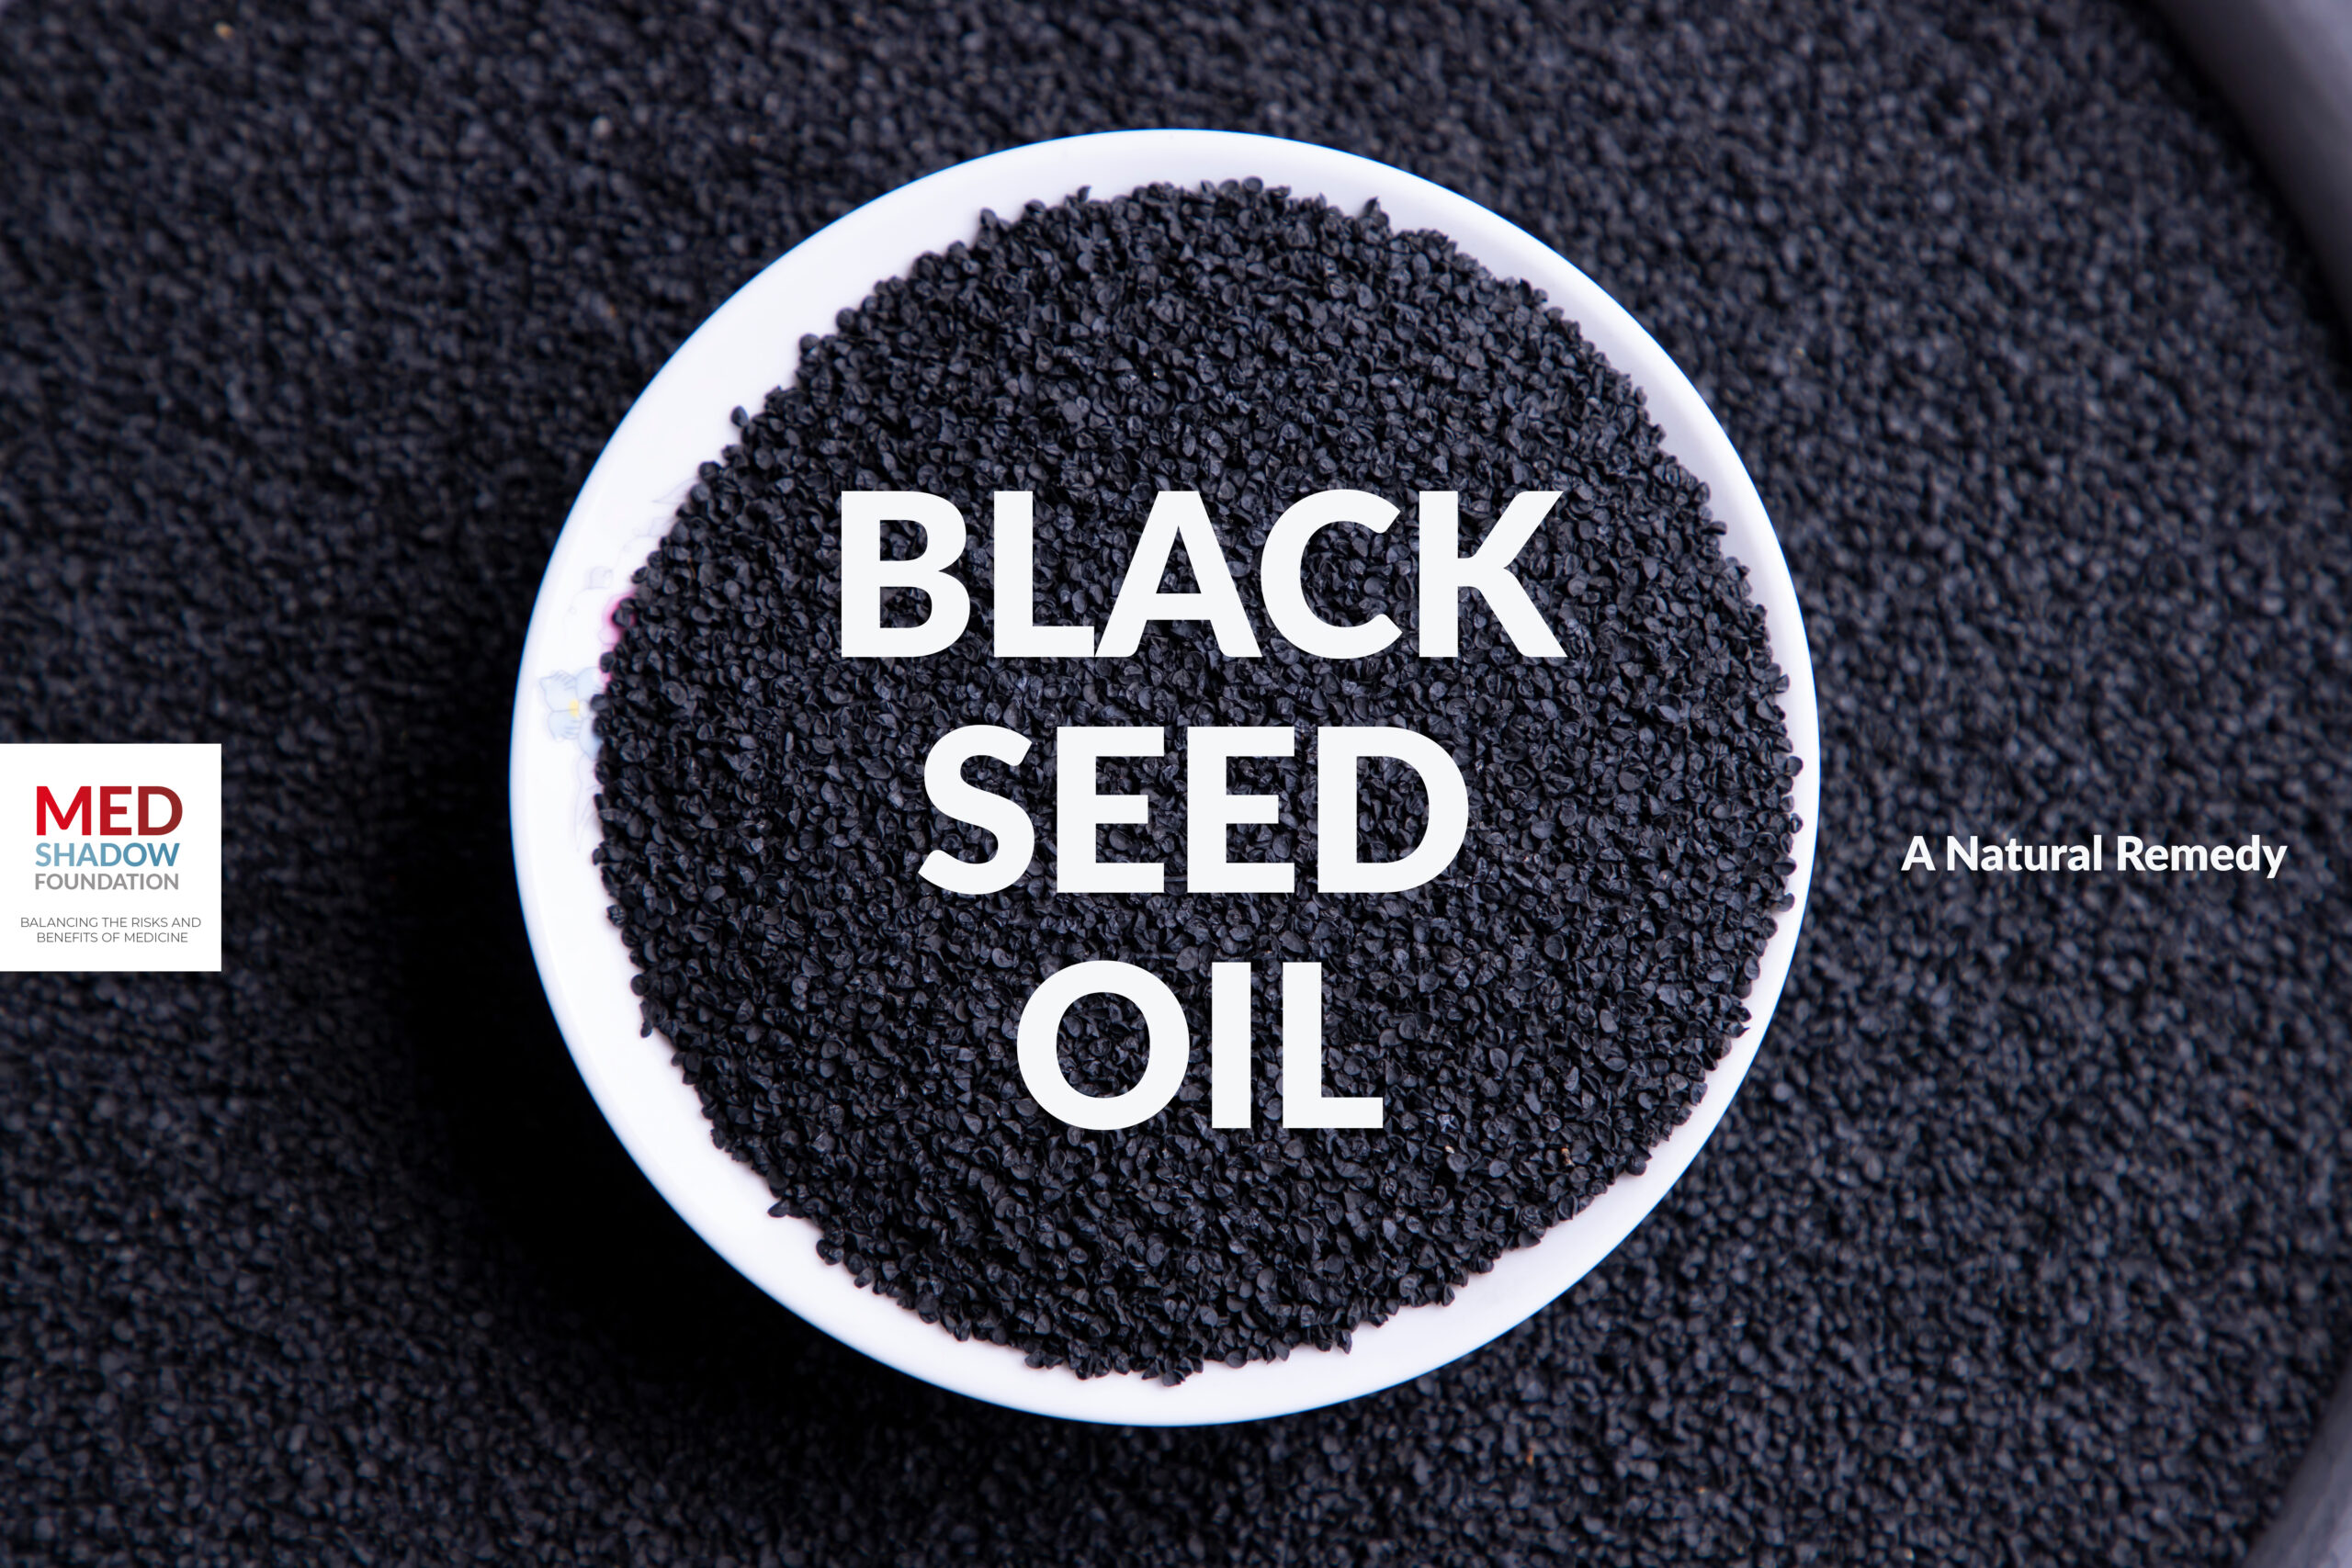 Does Black Seed Oil Makes You Lose Weight? – Nature's Blends